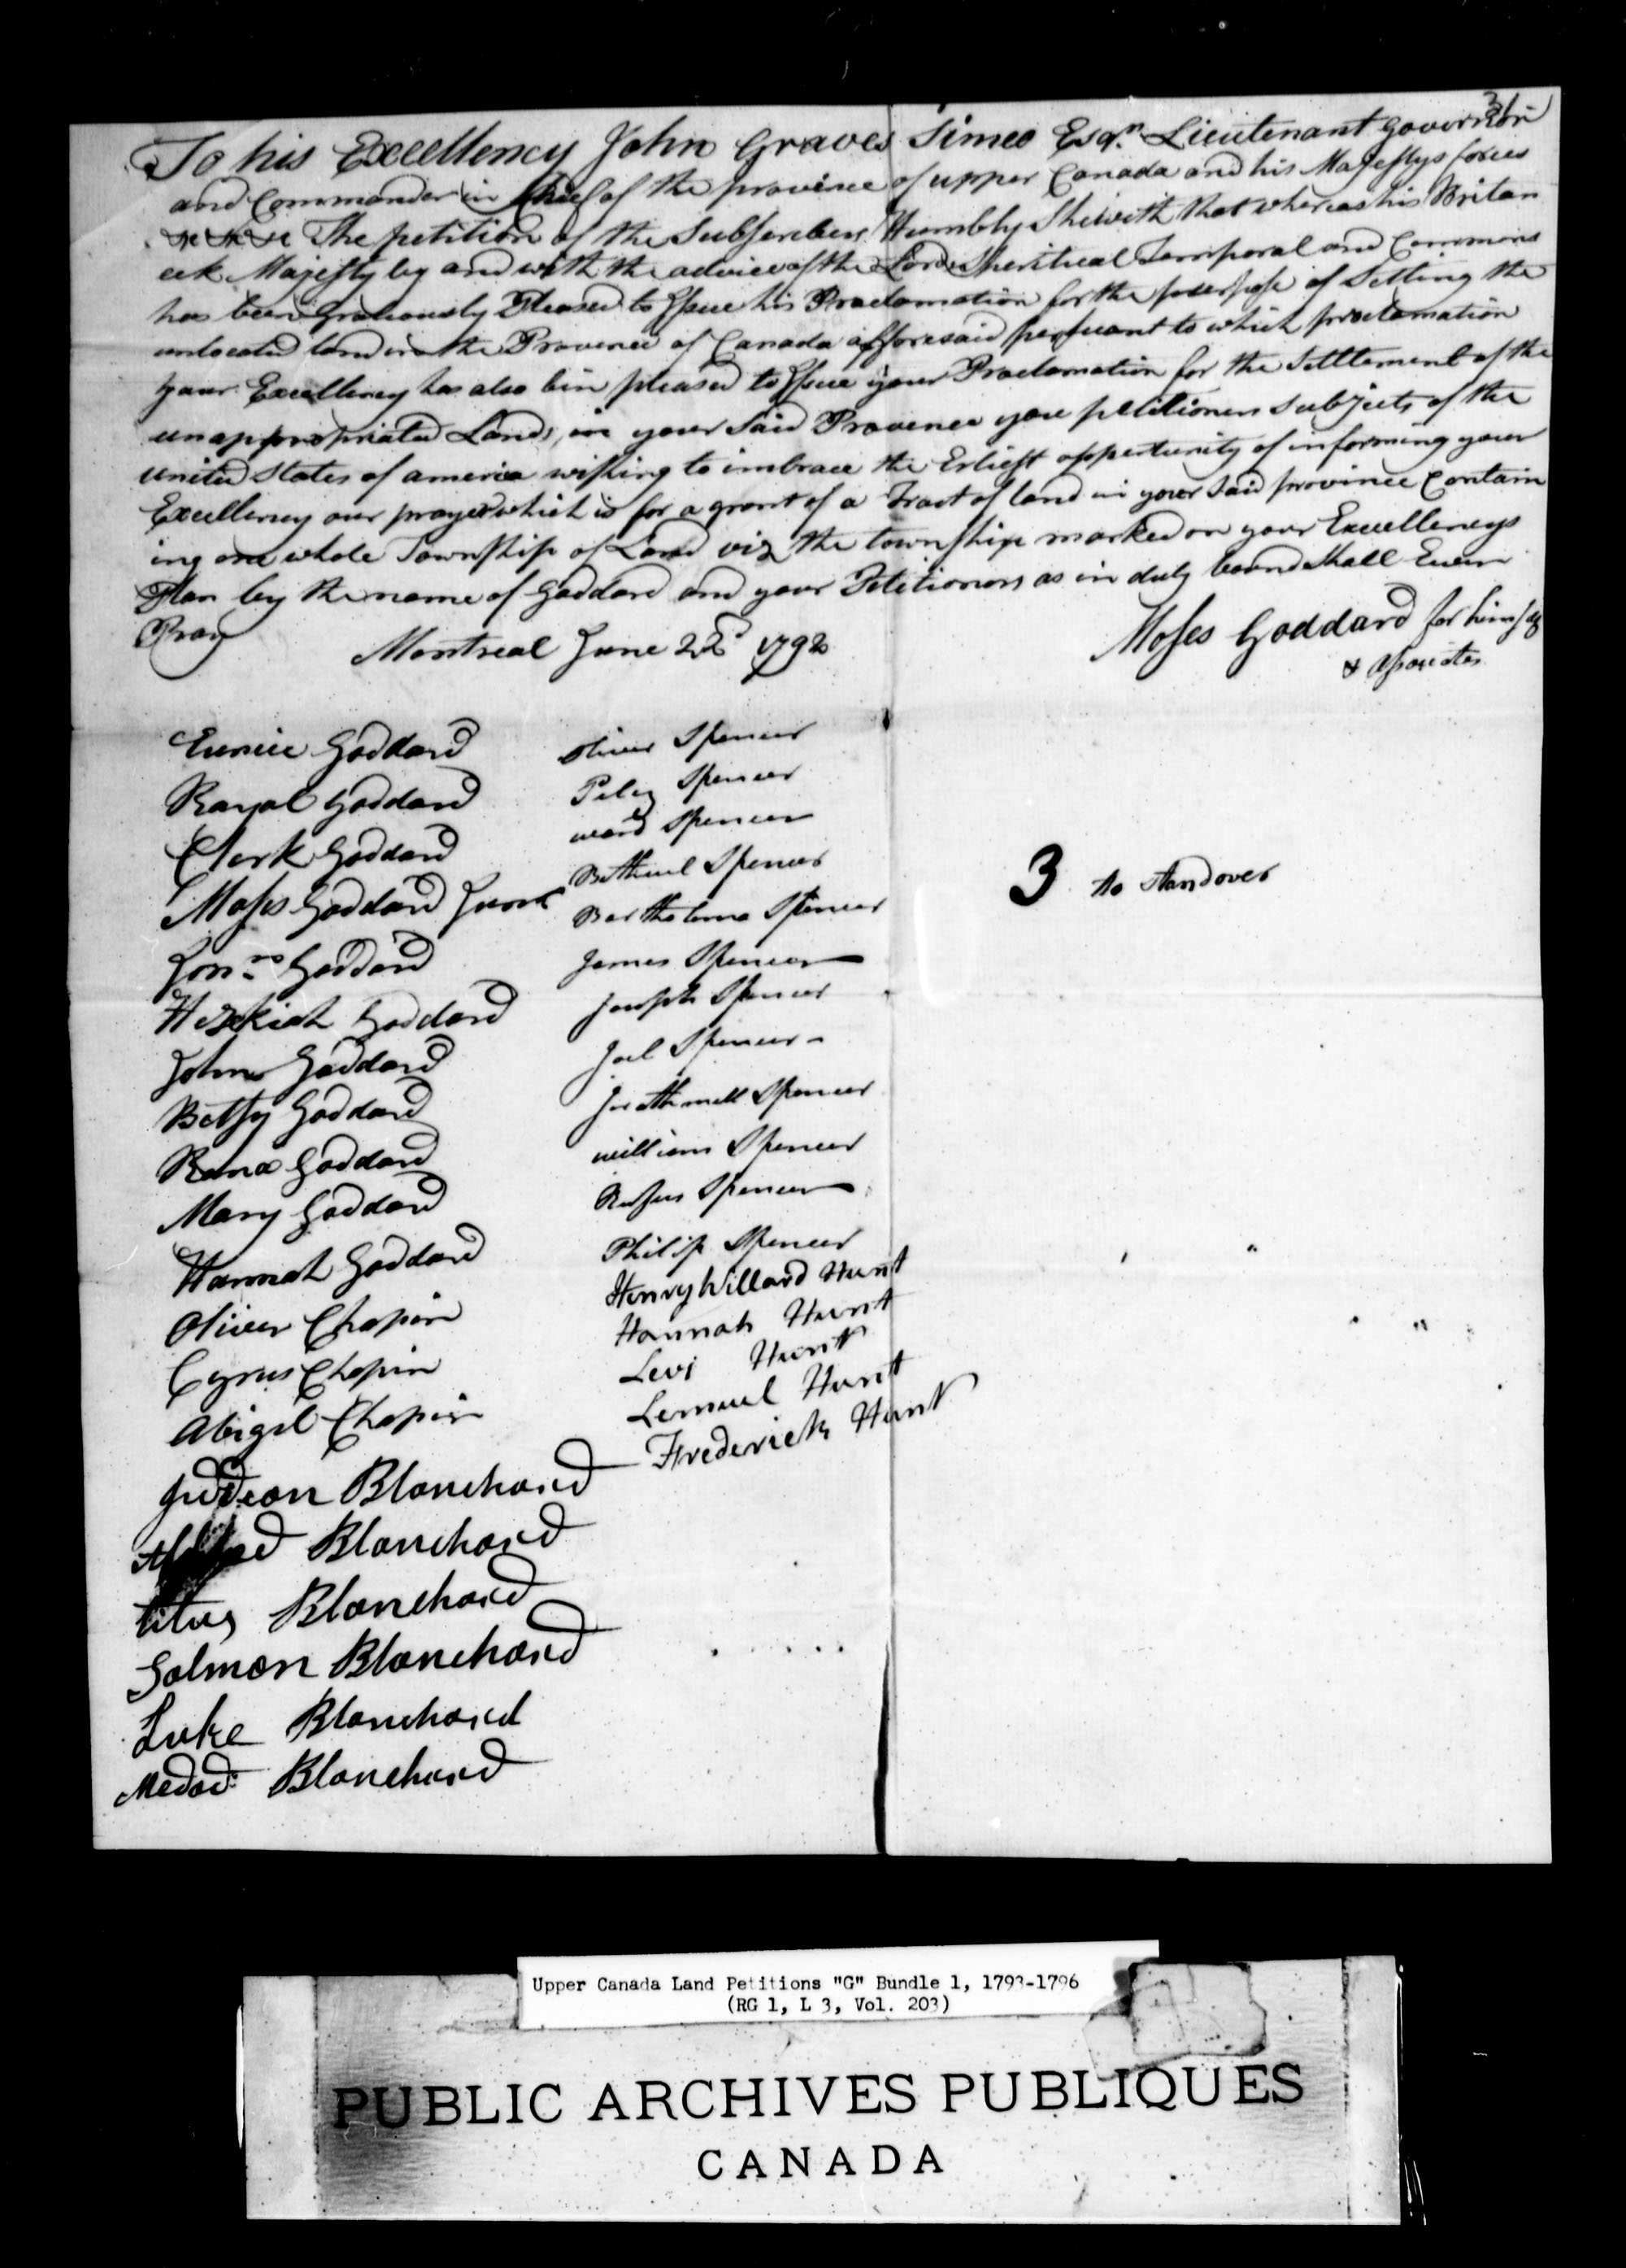 Title: Upper Canada Land Petitions (1763-1865) - Mikan Number: 205131 - Microform: c-2027